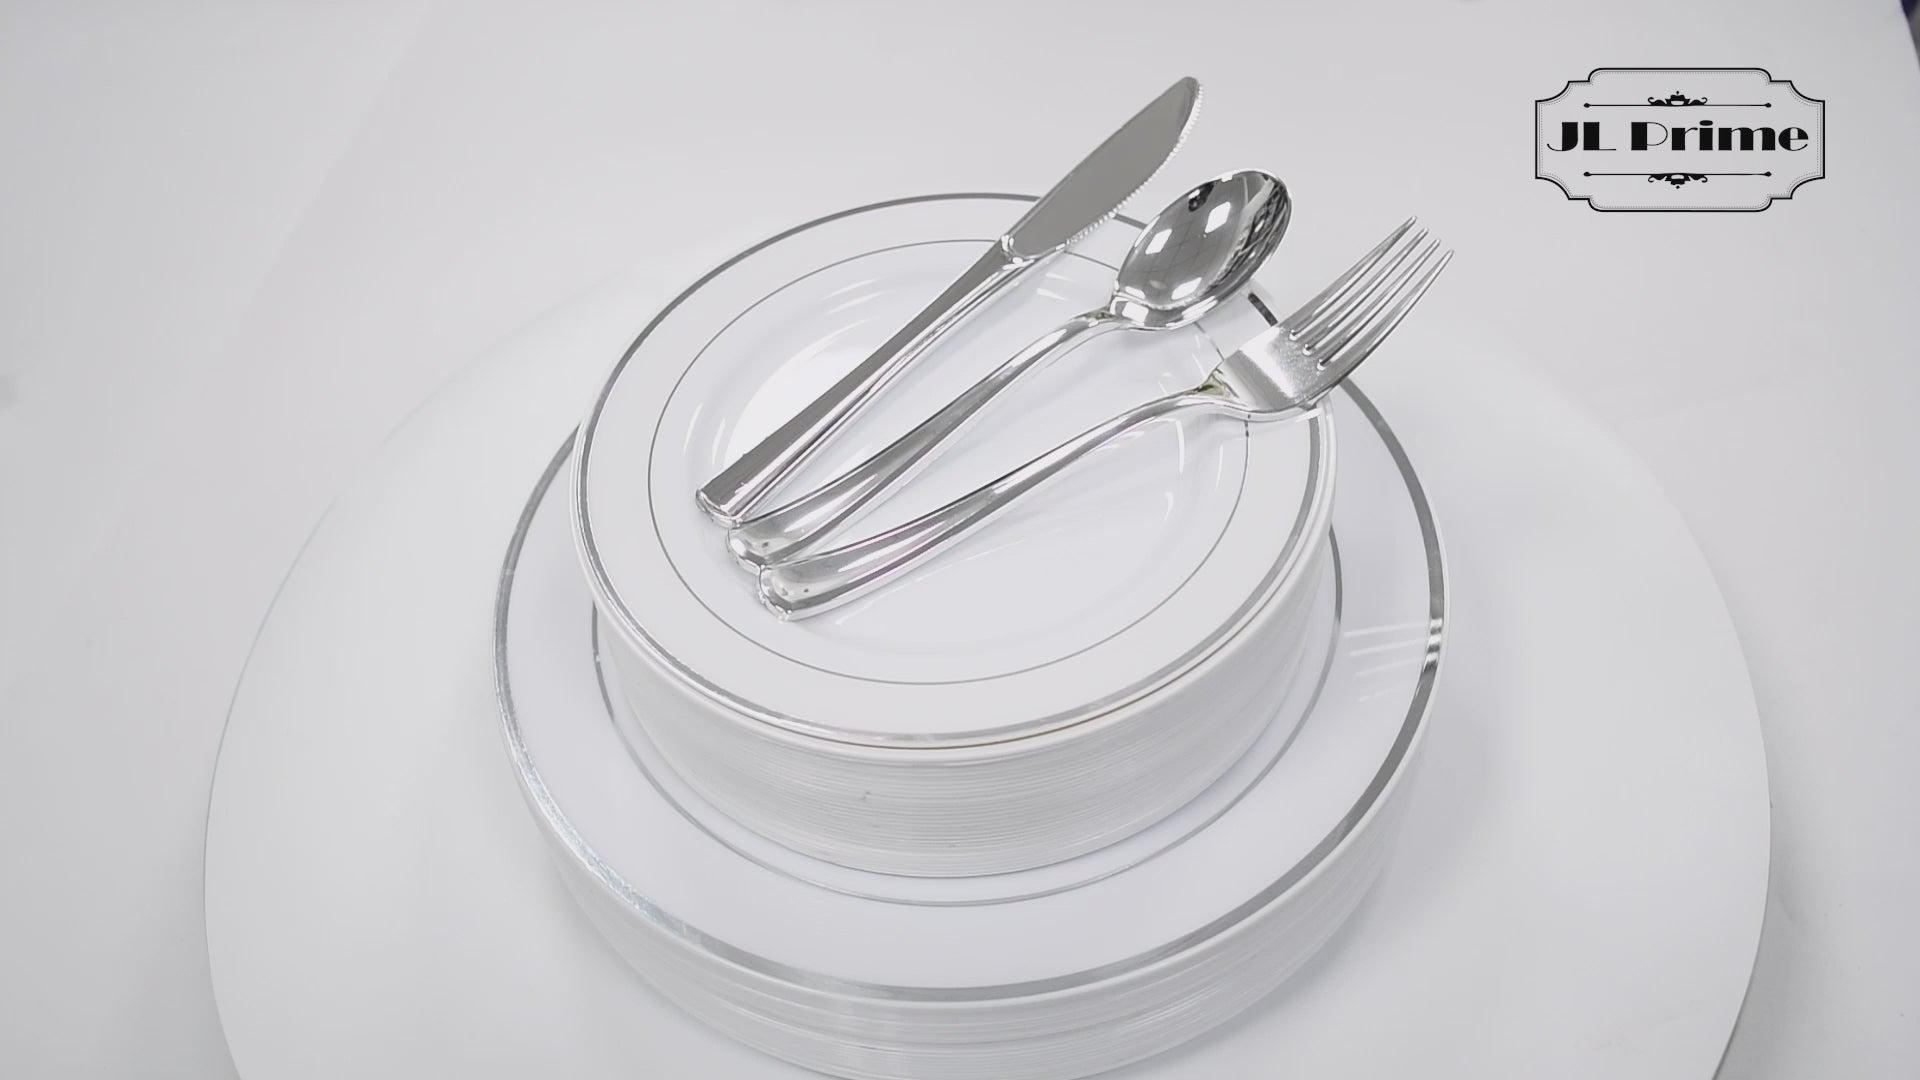 Silver Spoons Modern Plastic Plates for Party, Heavy Duty